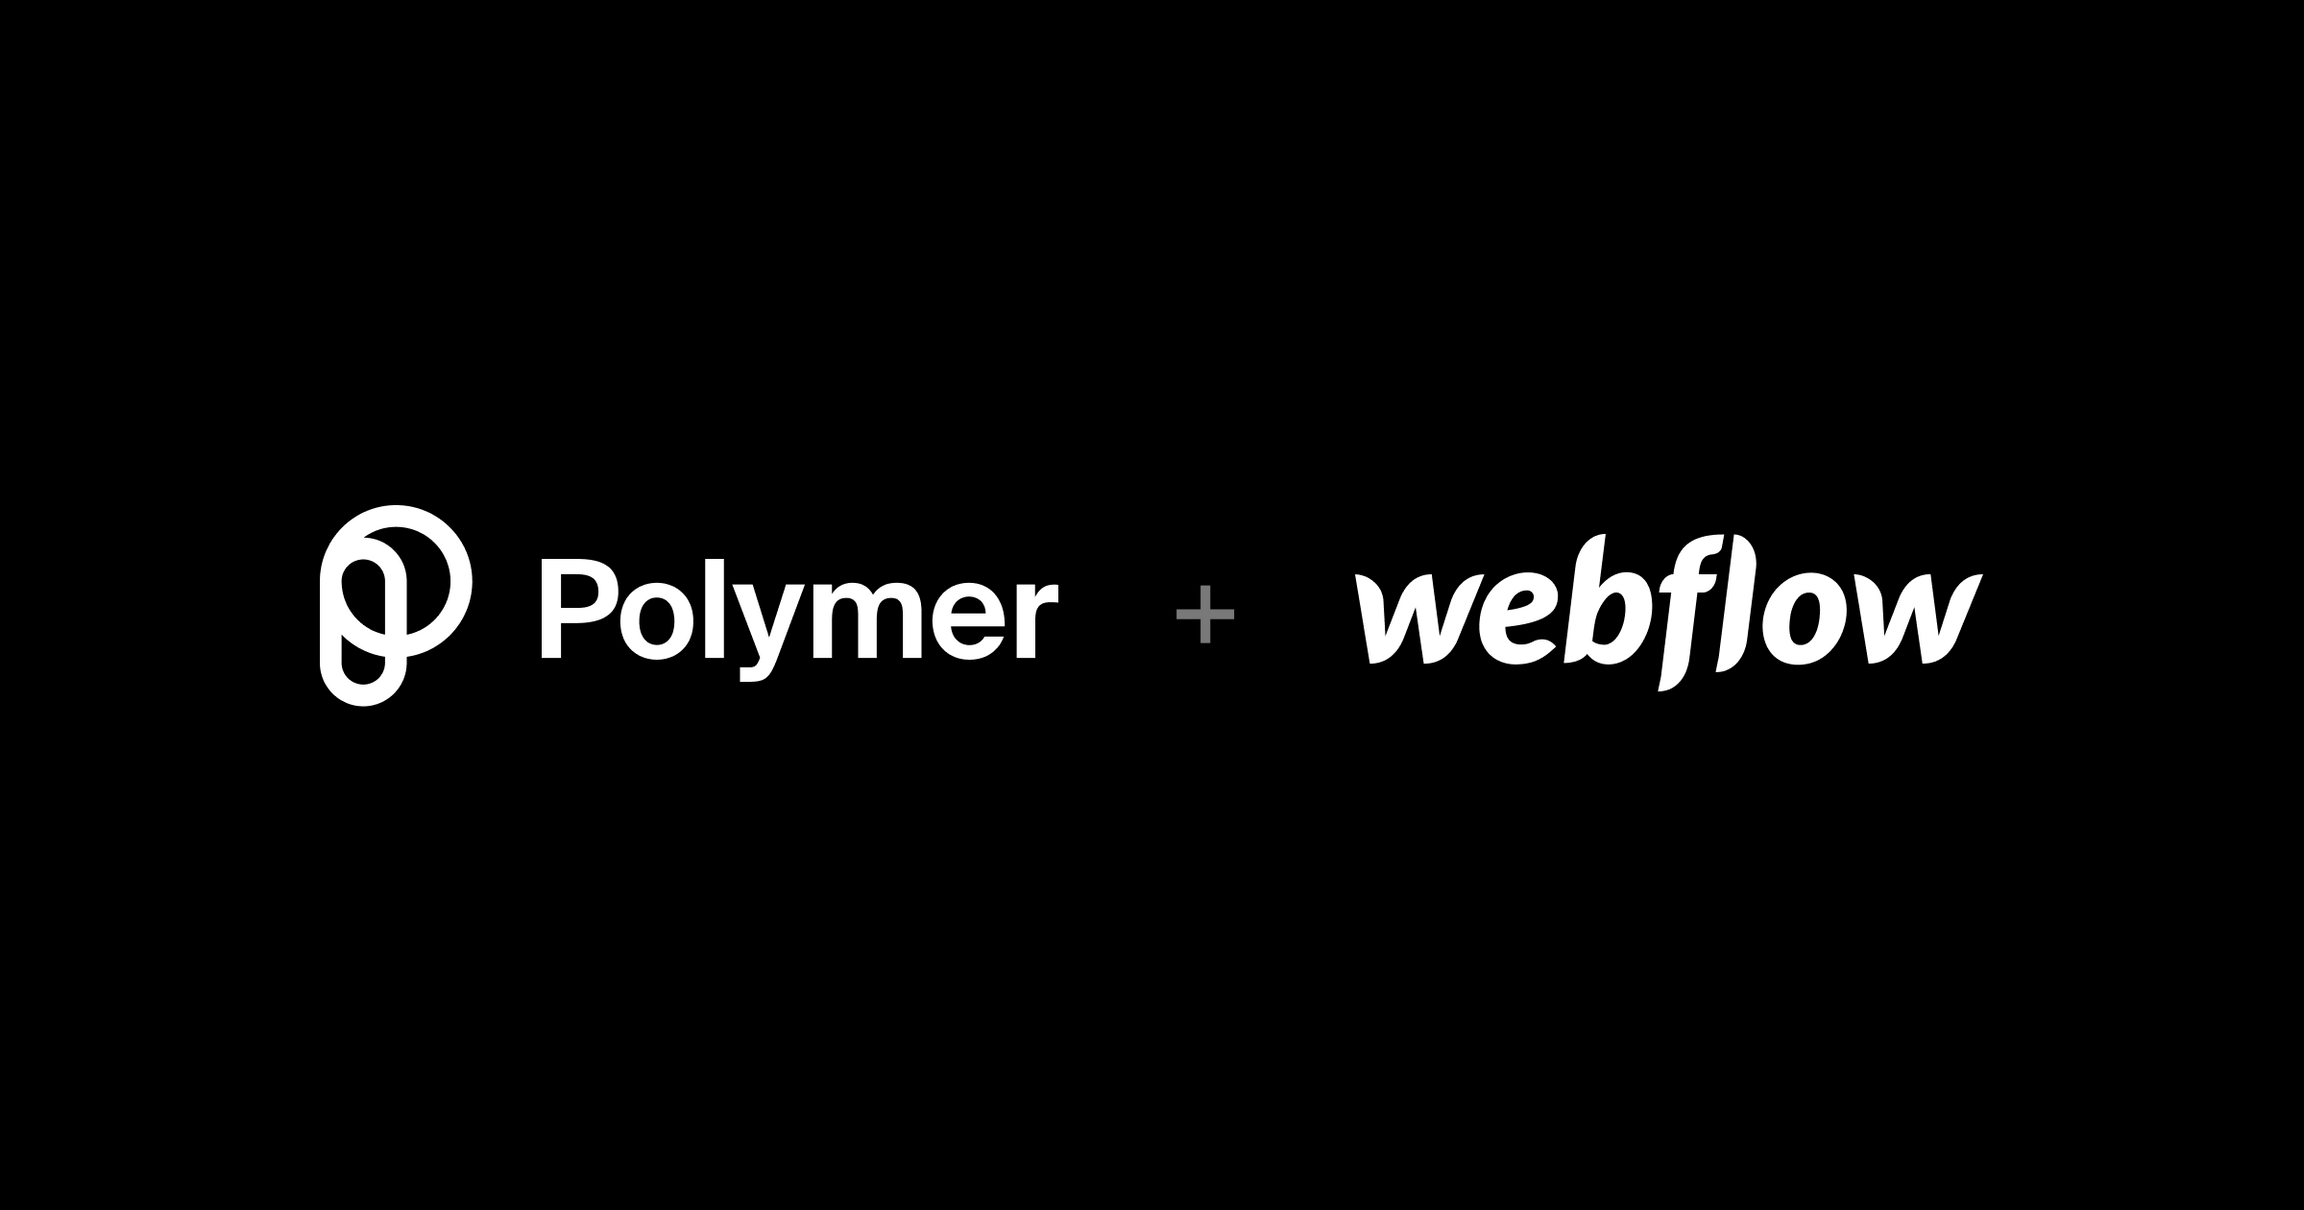 The Polymer and Webflow logos